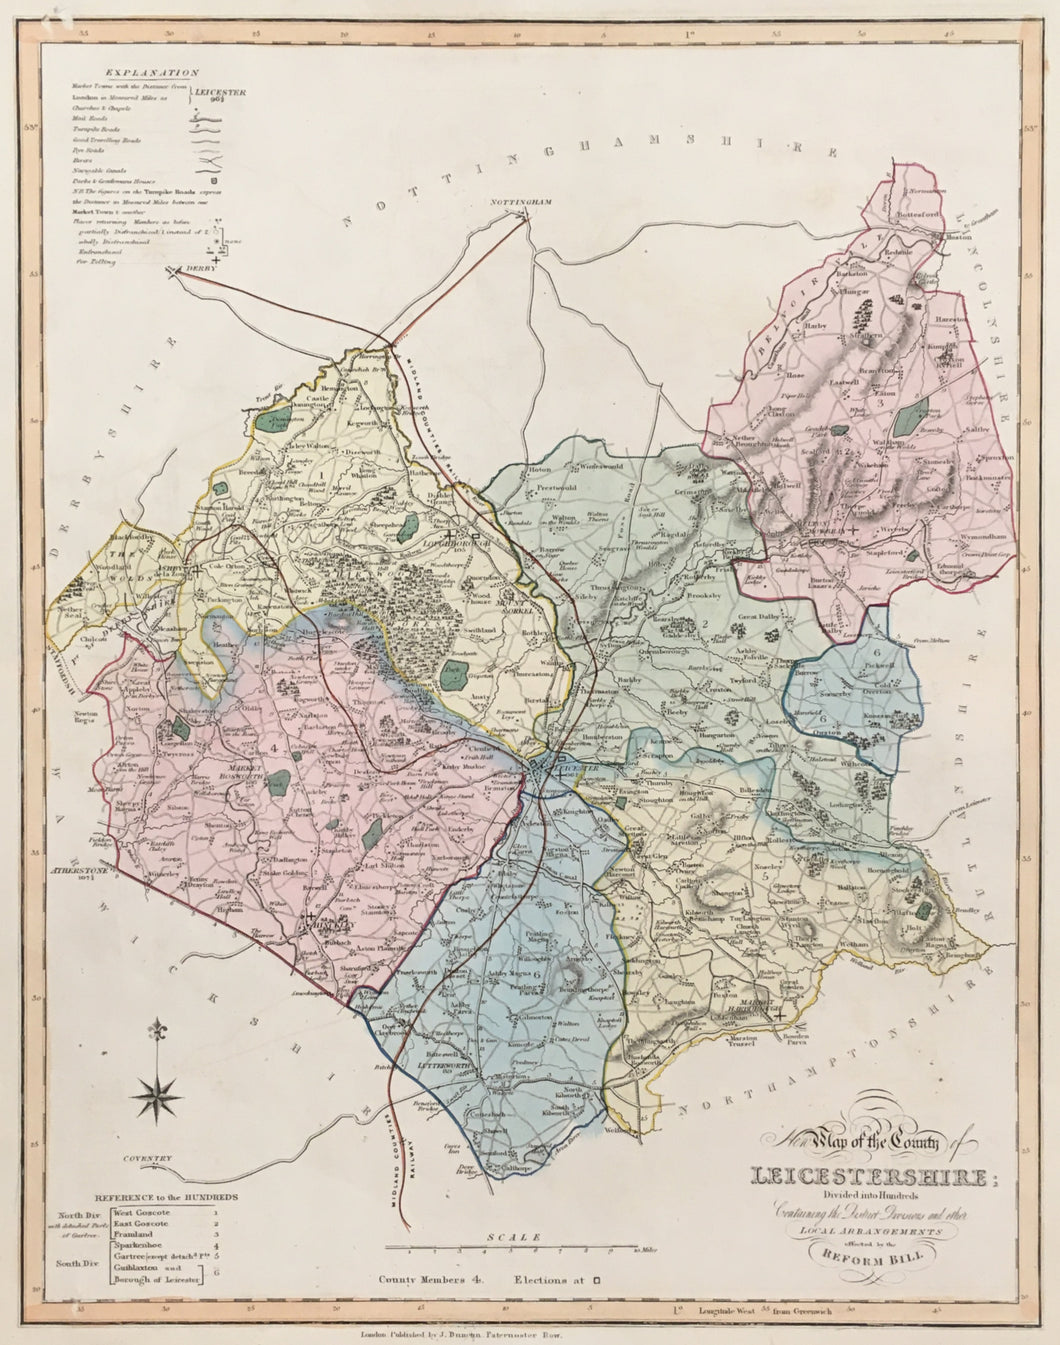 Ebden, William “New Map of the County of Leicestershire”